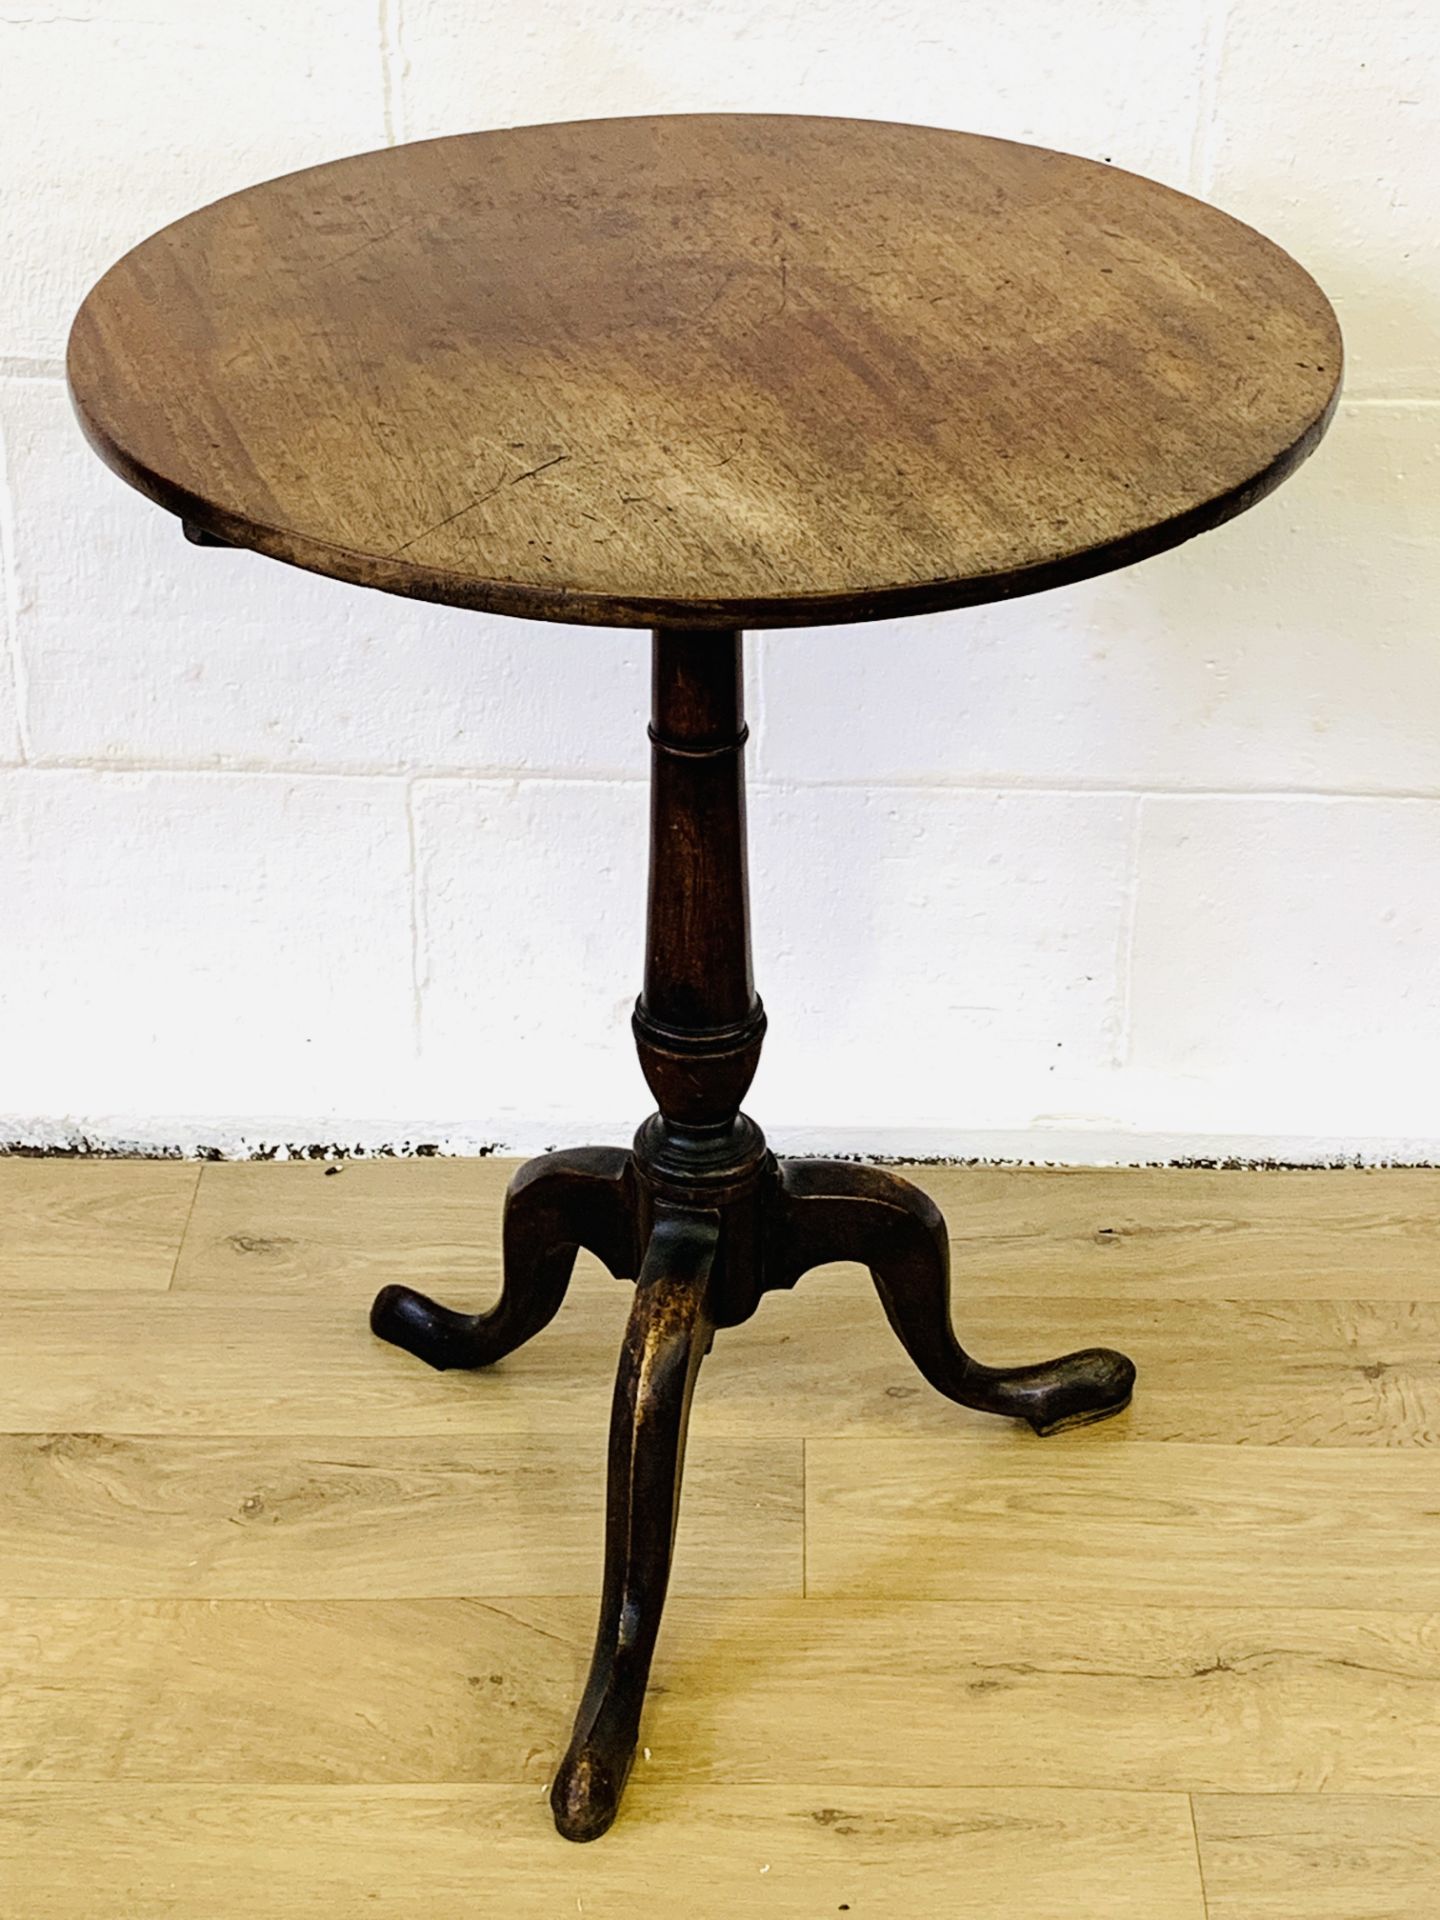 Tilt top occasional table